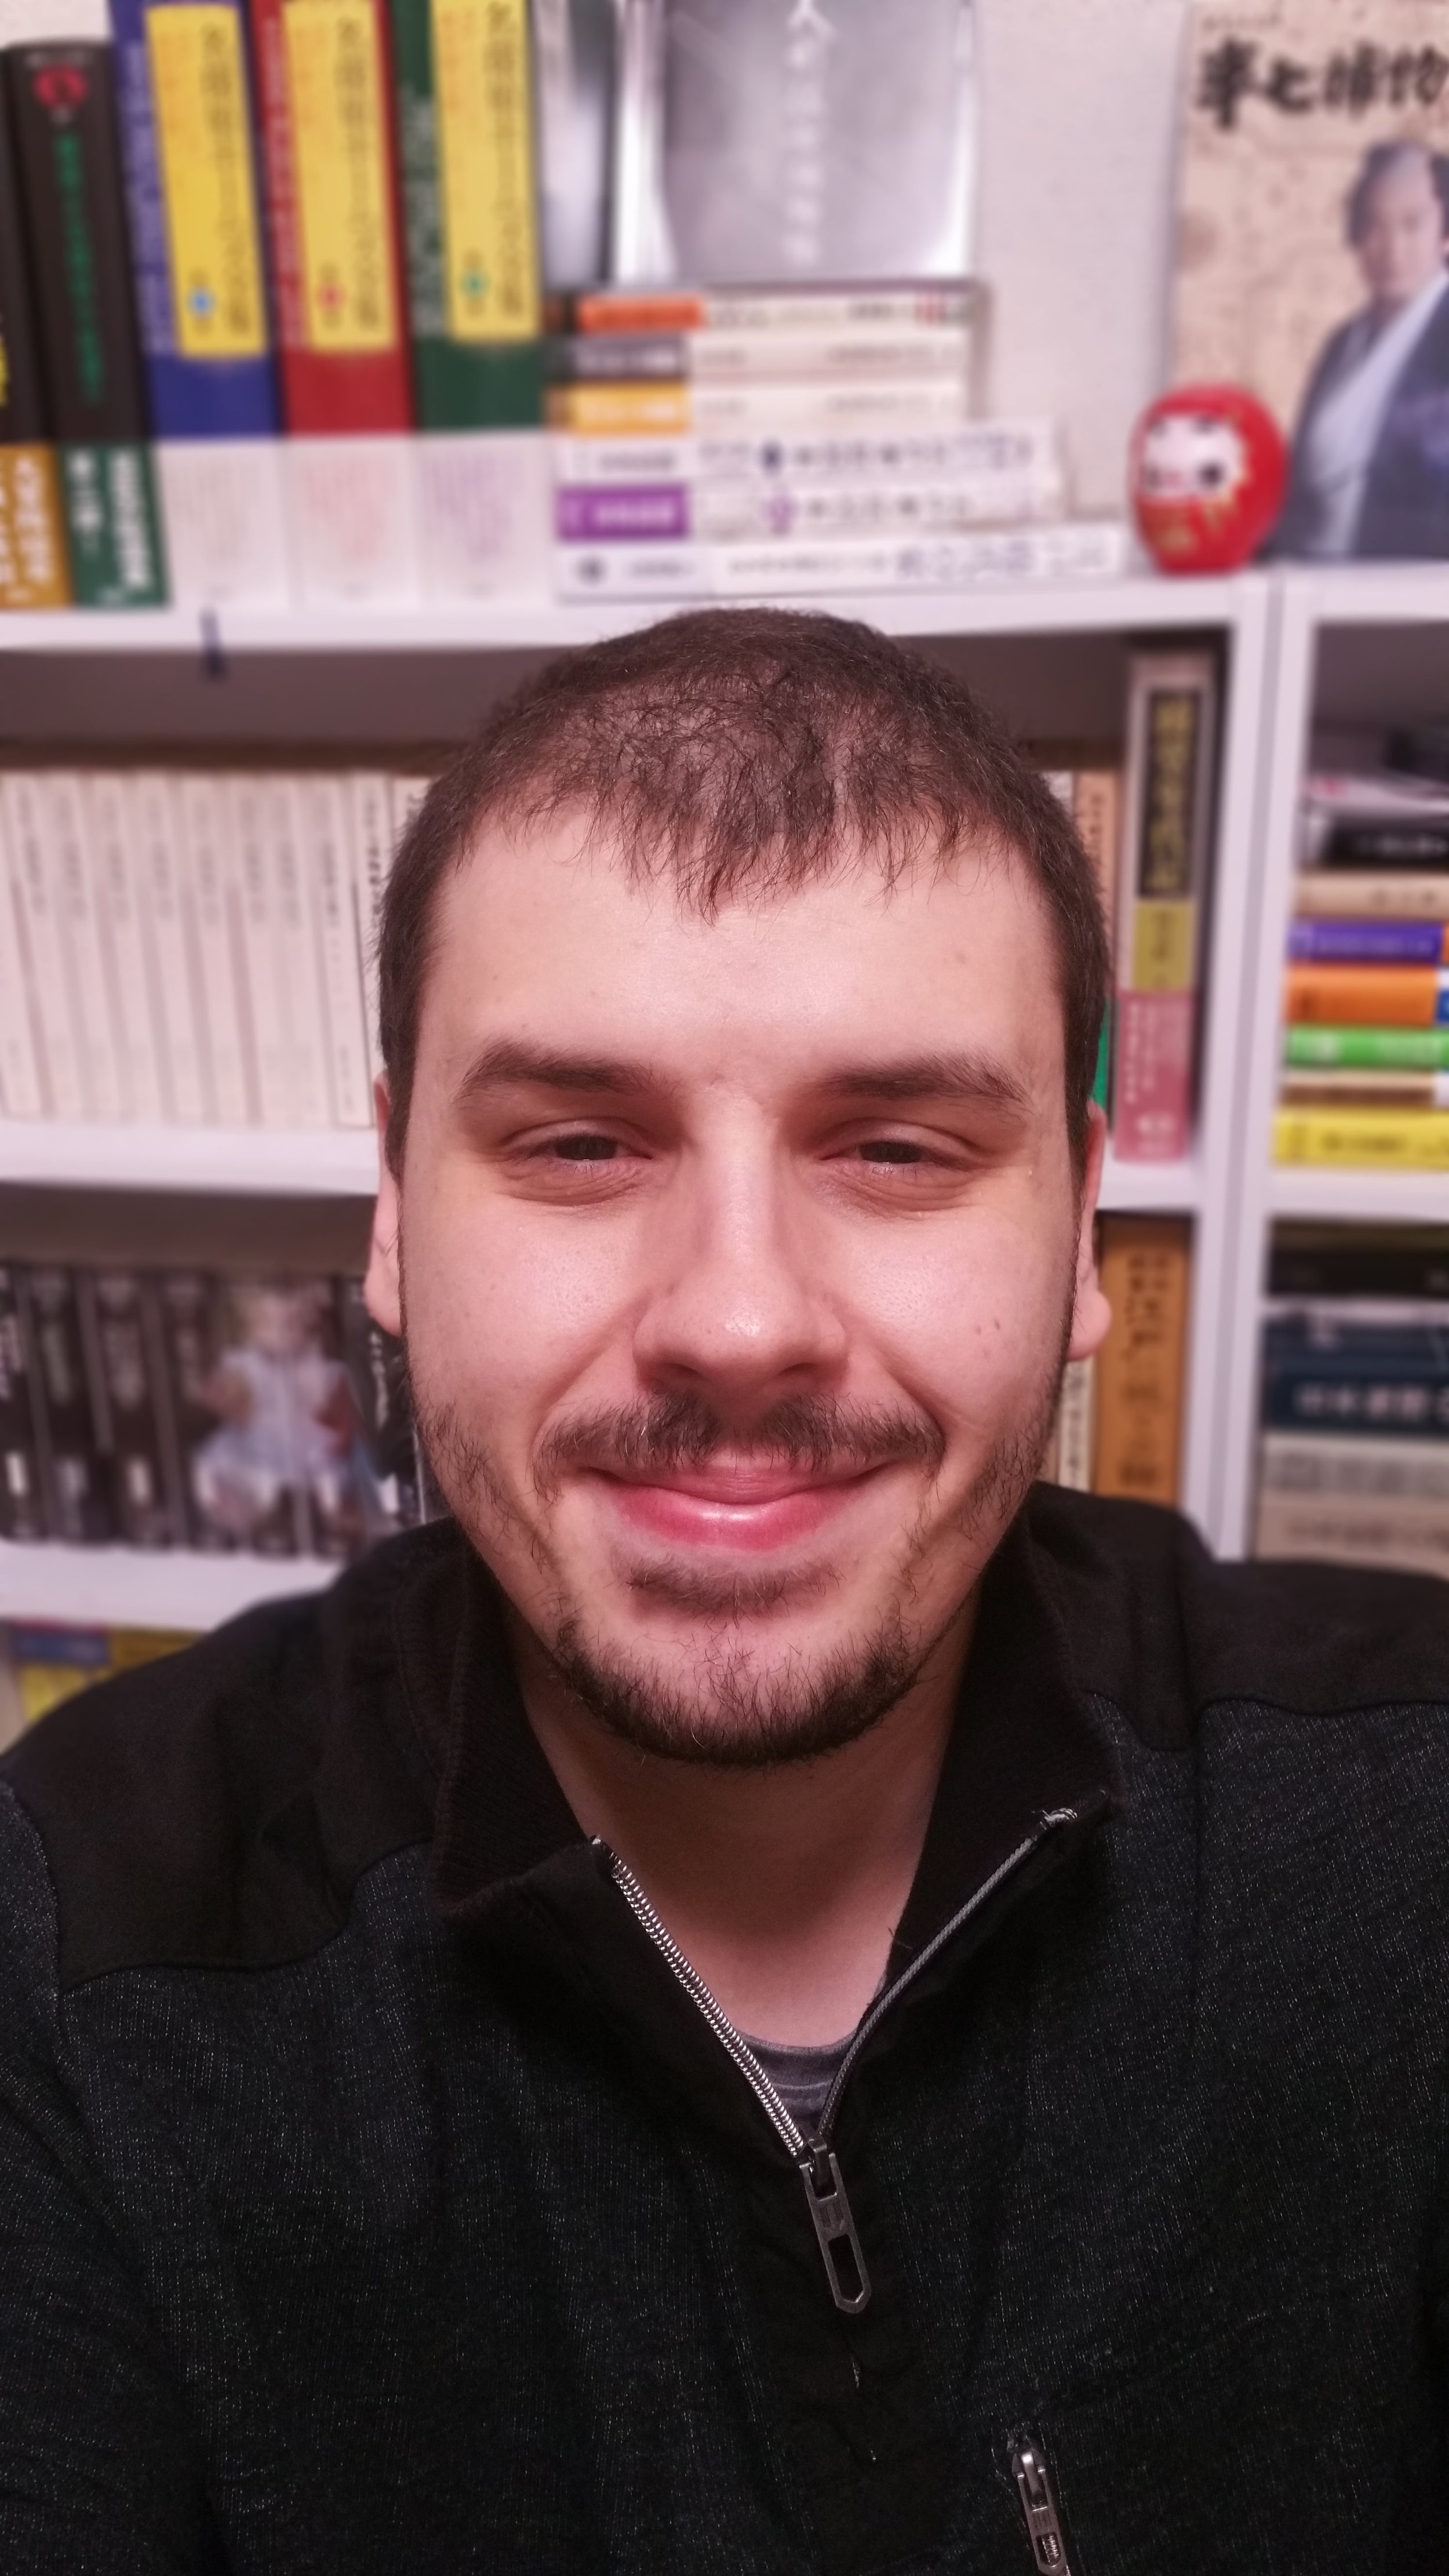 Enrico PaoliniEnrico is a PhD student at "L'Orientale" University of Naples, Italy. He researches Japanese modern detective literature, more specifically the torimonochō genre. Enrico took part in the 14th EAJS PhD Workshop 2018 in Belgrade, Serbia.